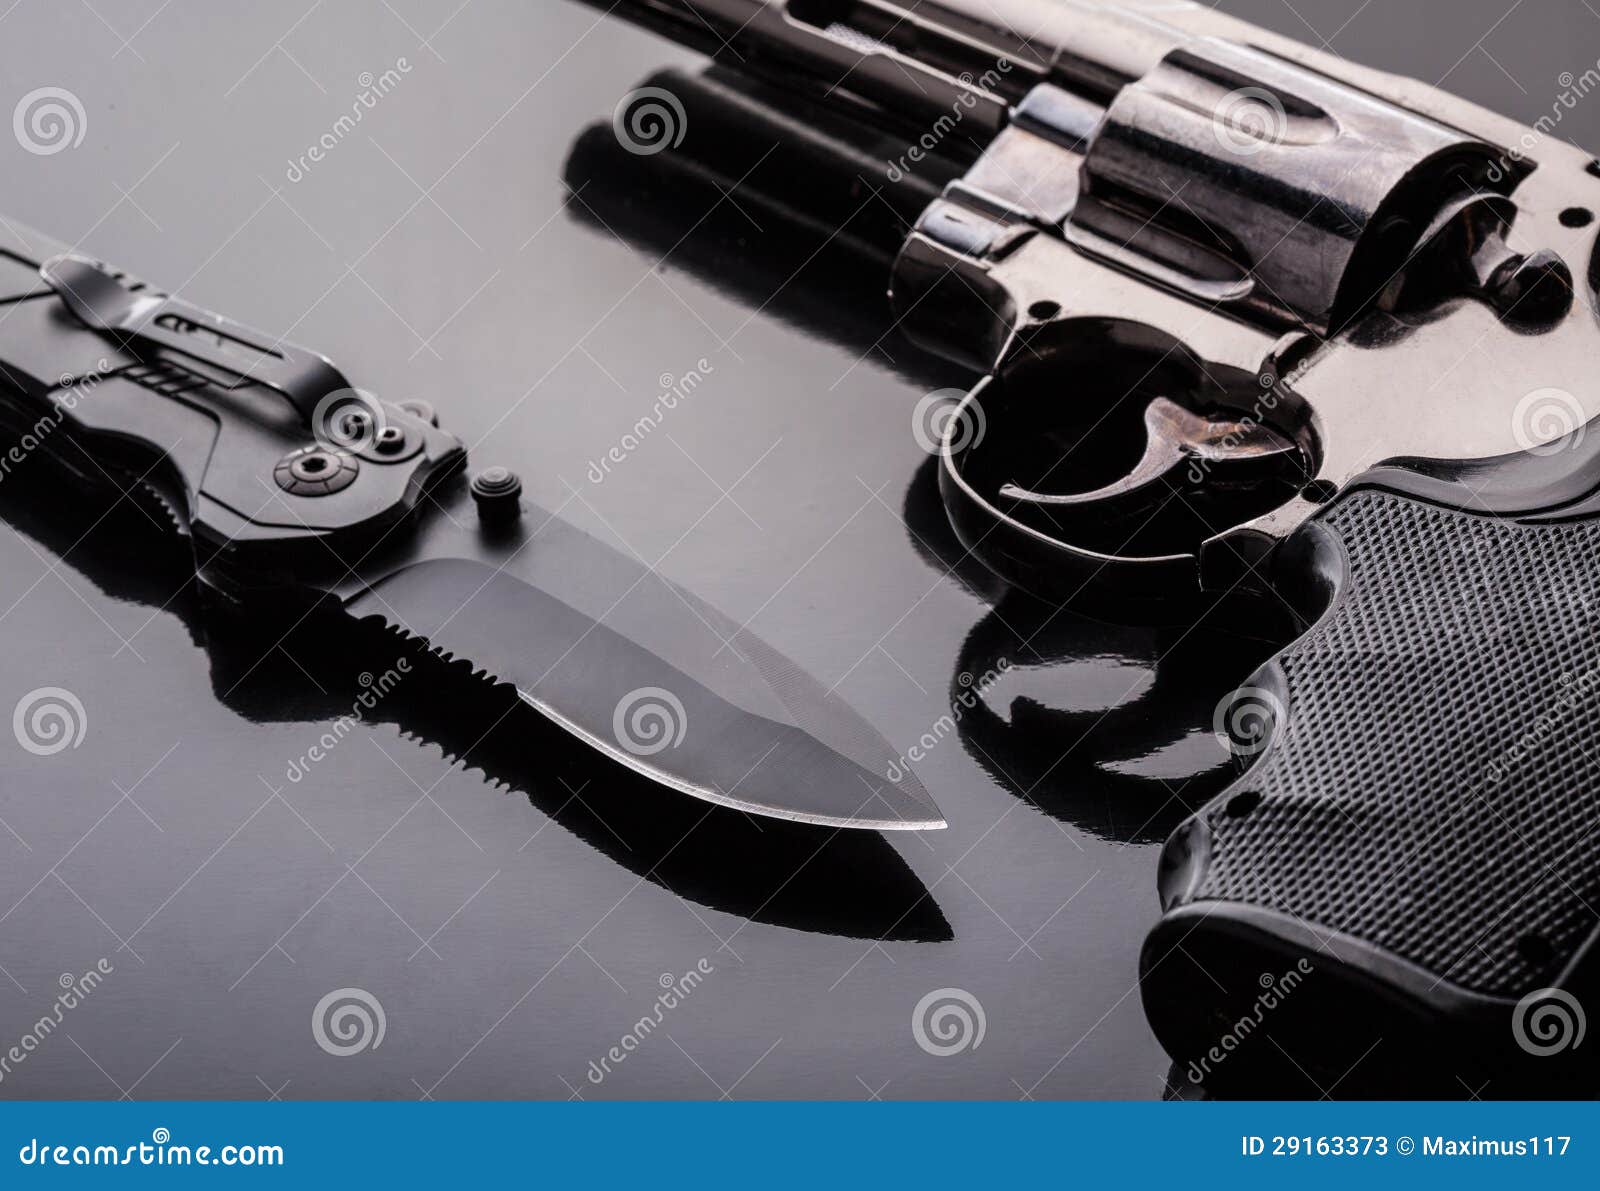 revolver and tactical knife